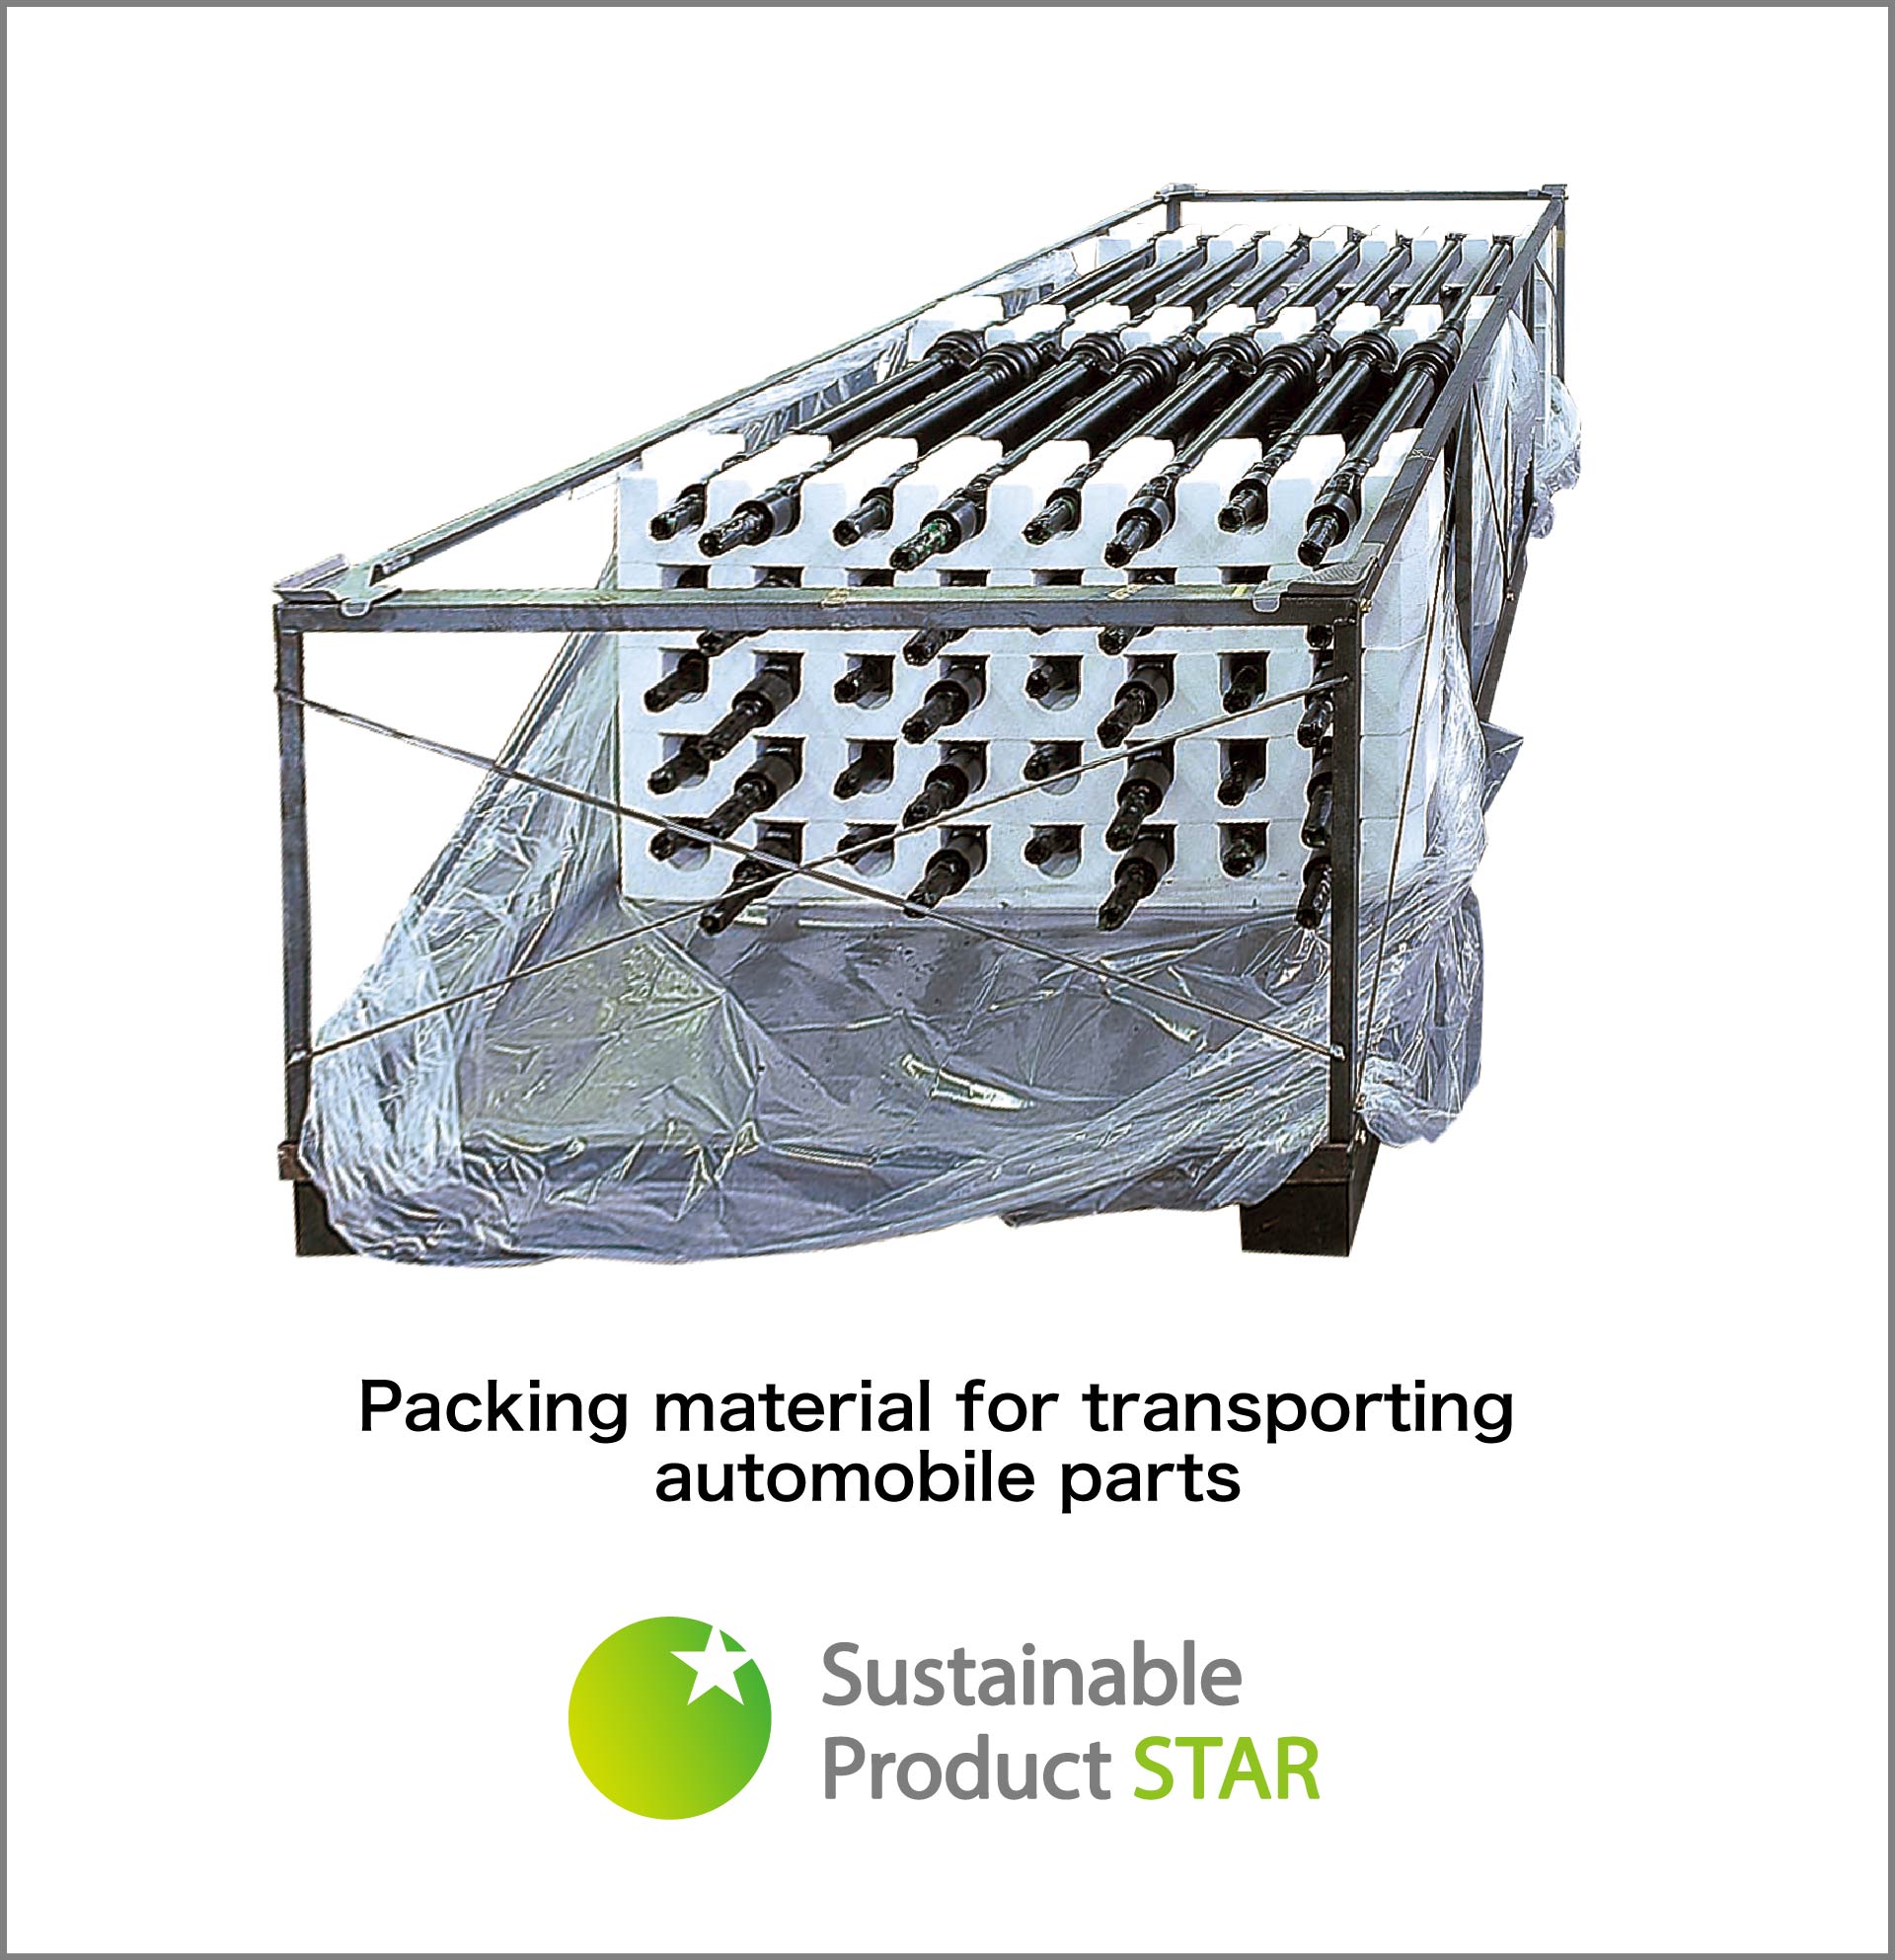 Packing material for transporting automobile parts